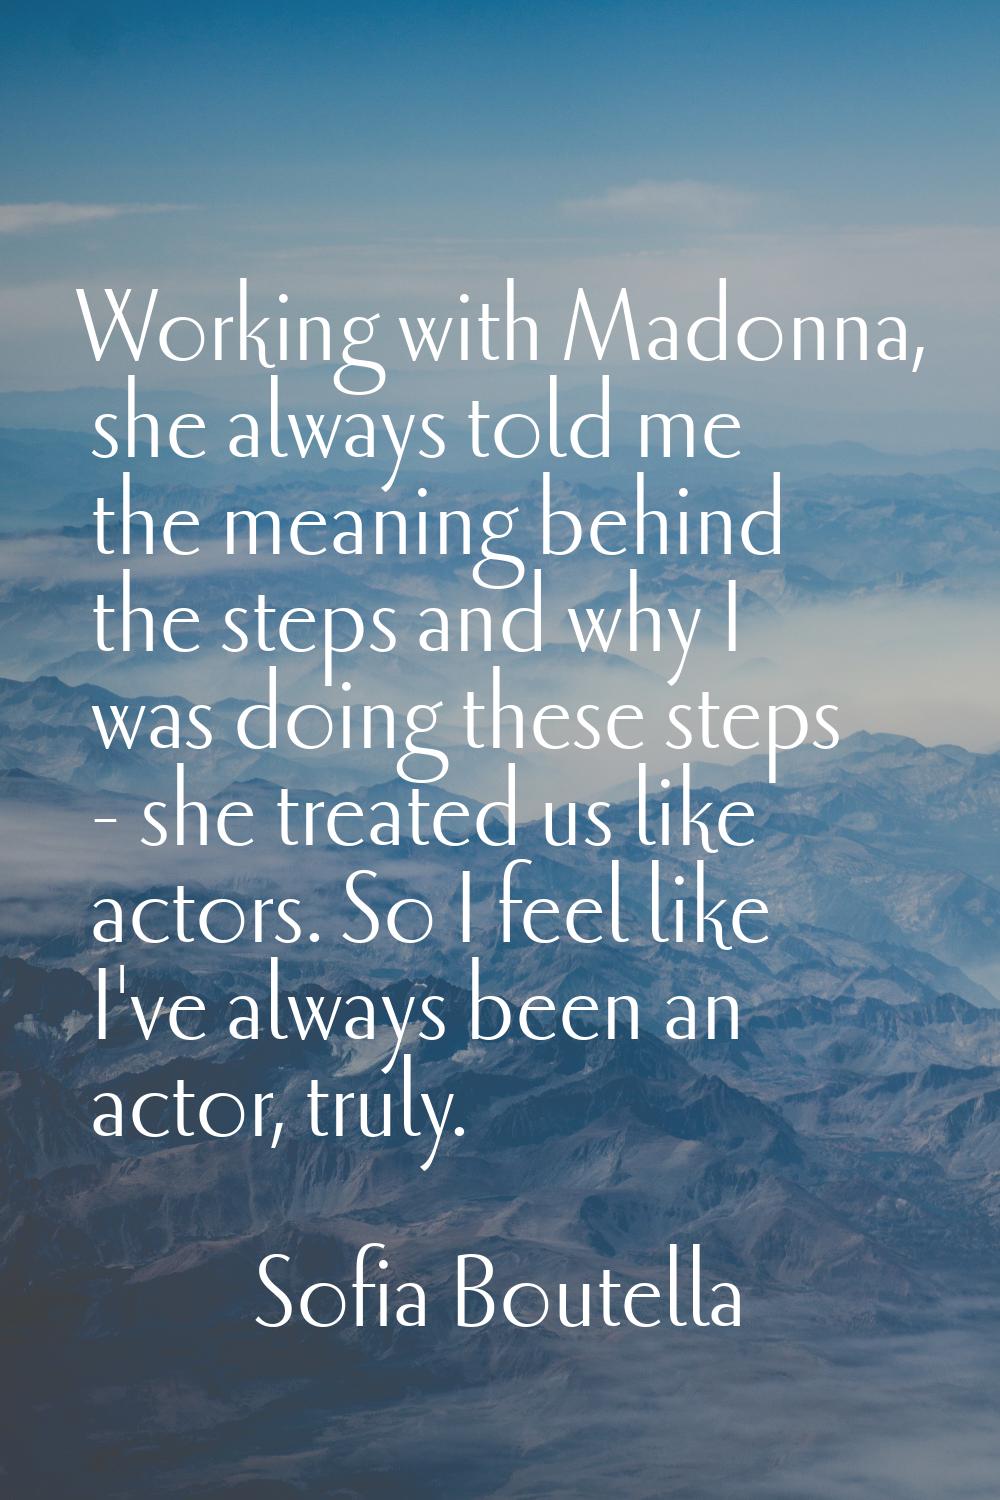 Working with Madonna, she always told me the meaning behind the steps and why I was doing these ste